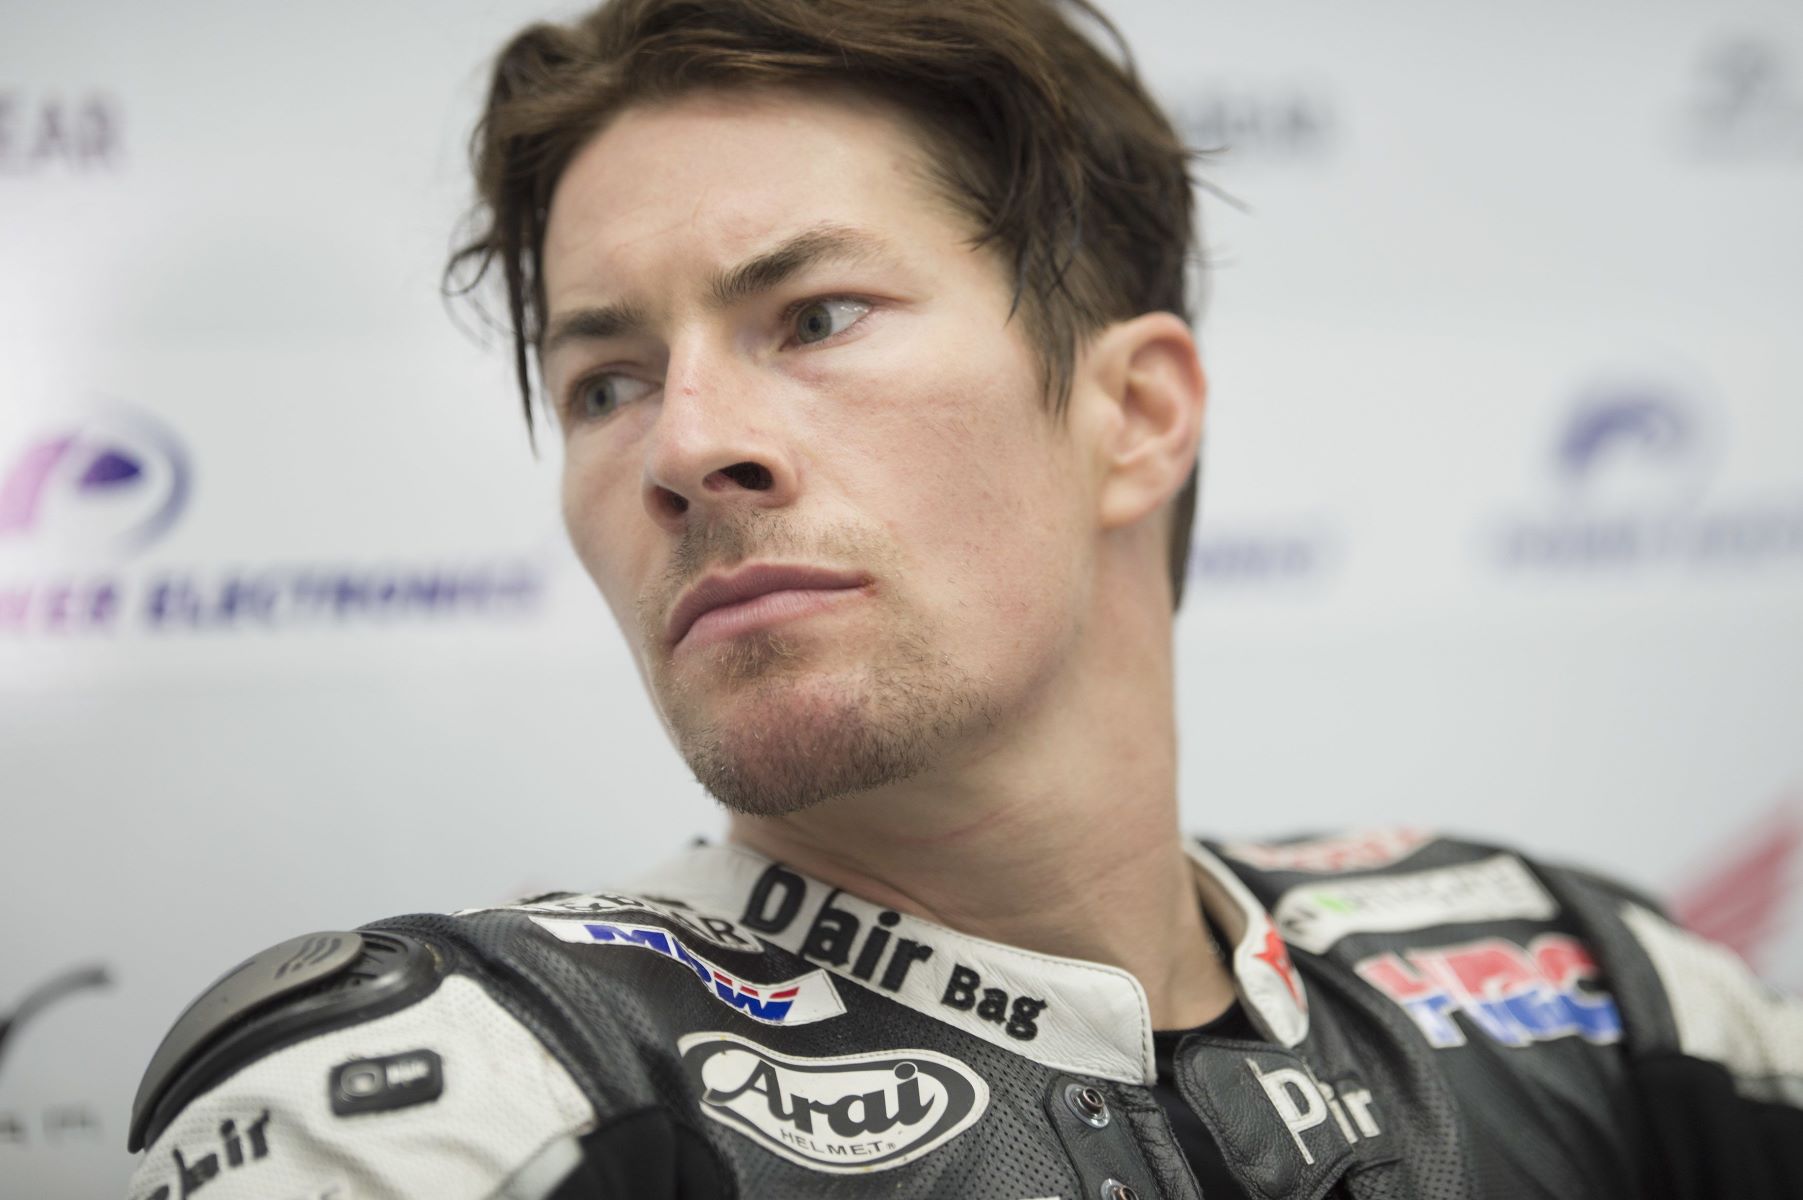 21-astonishing-facts-about-nicky-hayden